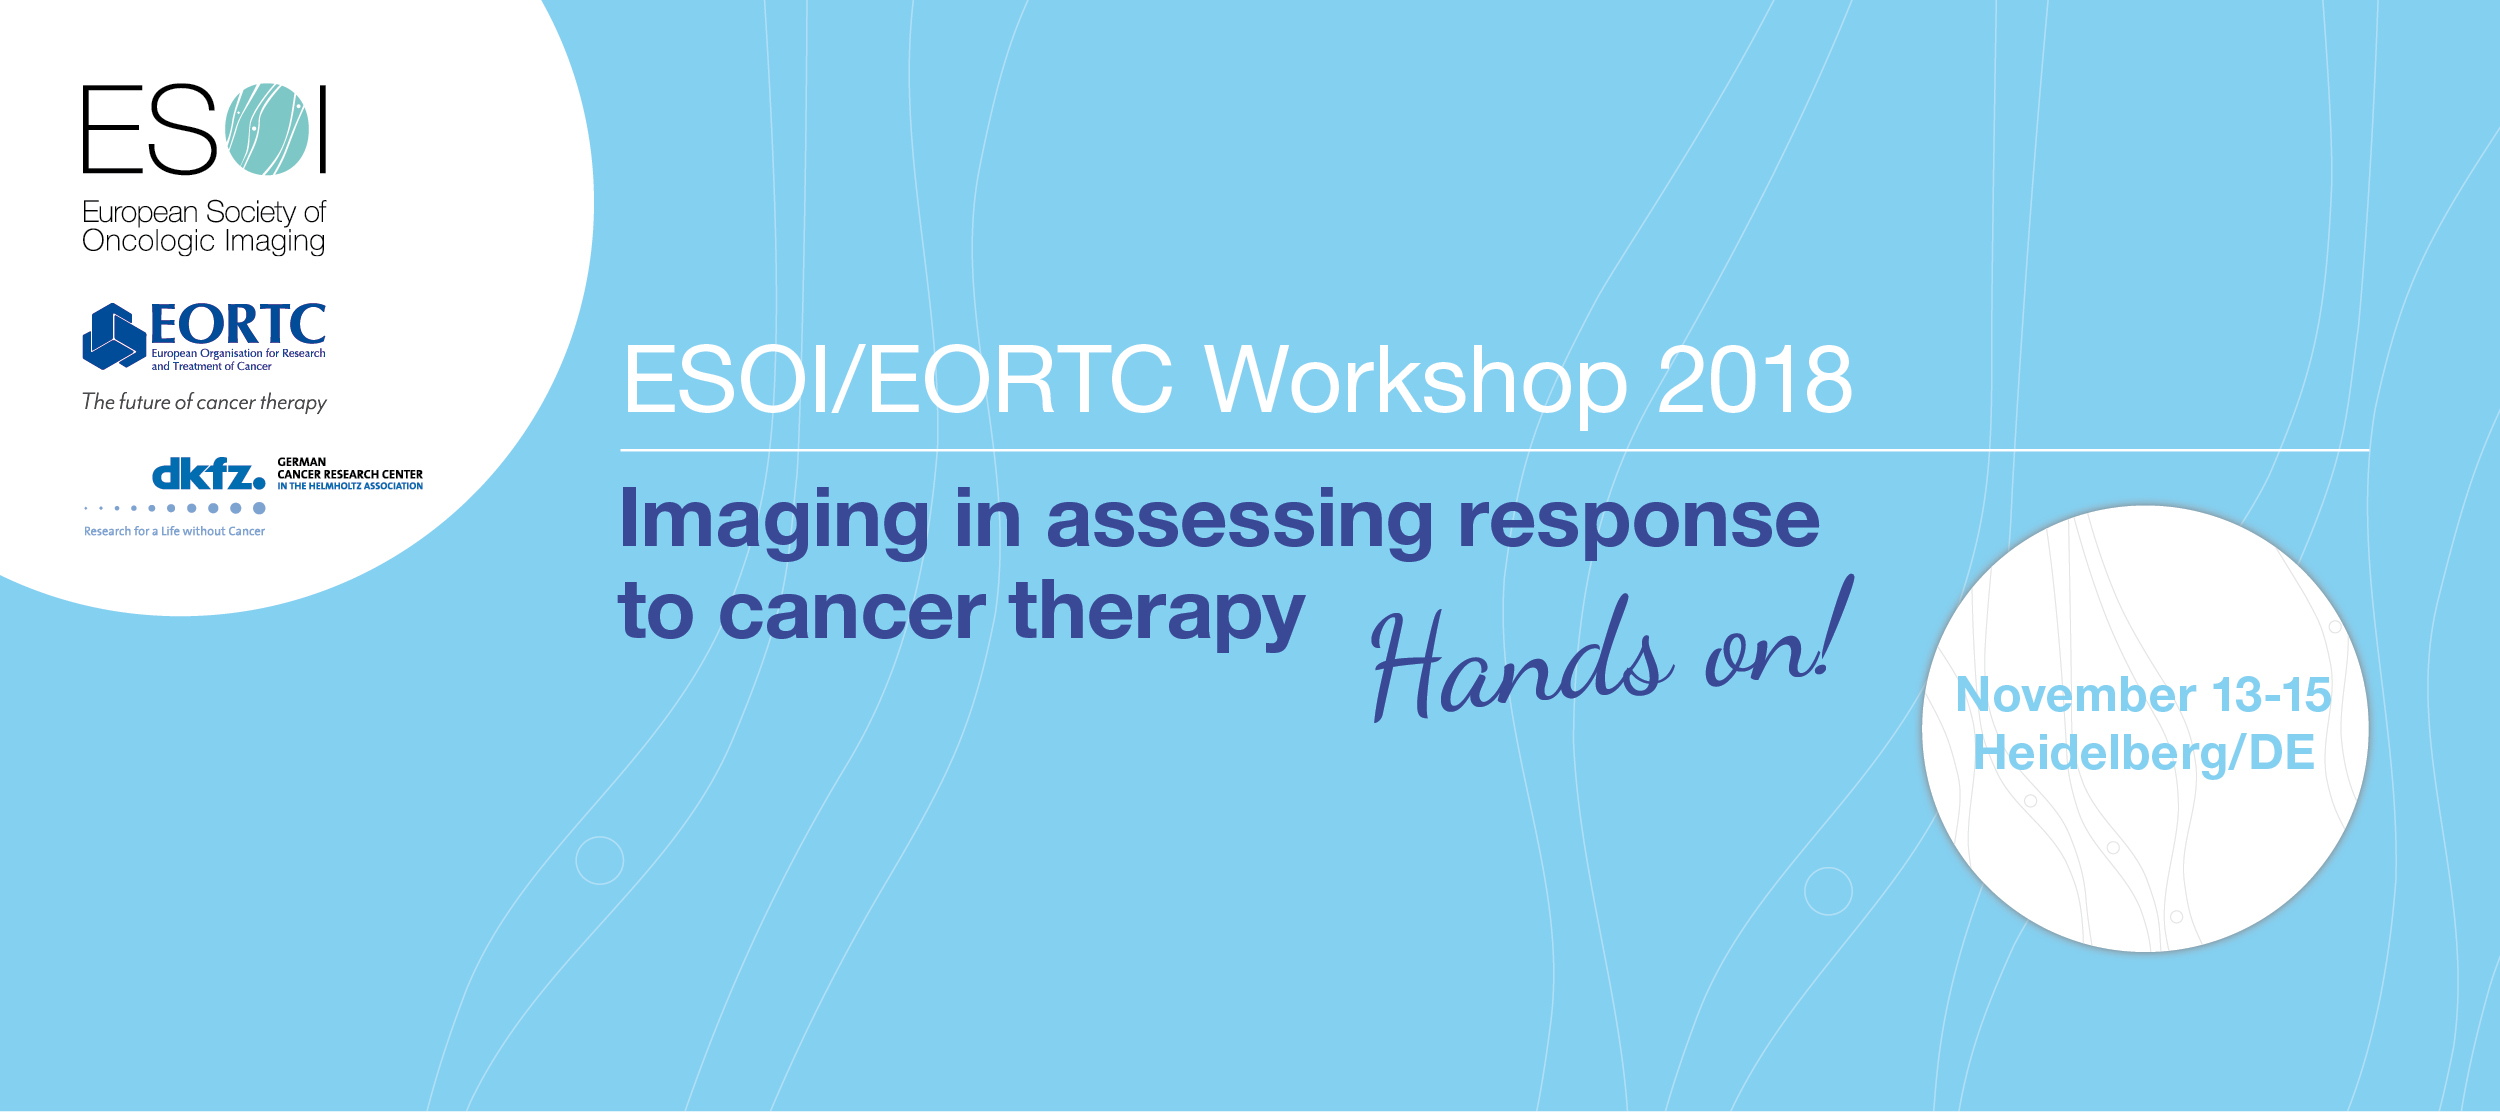 ESOI EORTC Workshop 2018 Imagine In Assessing Response To Cancer Therapy